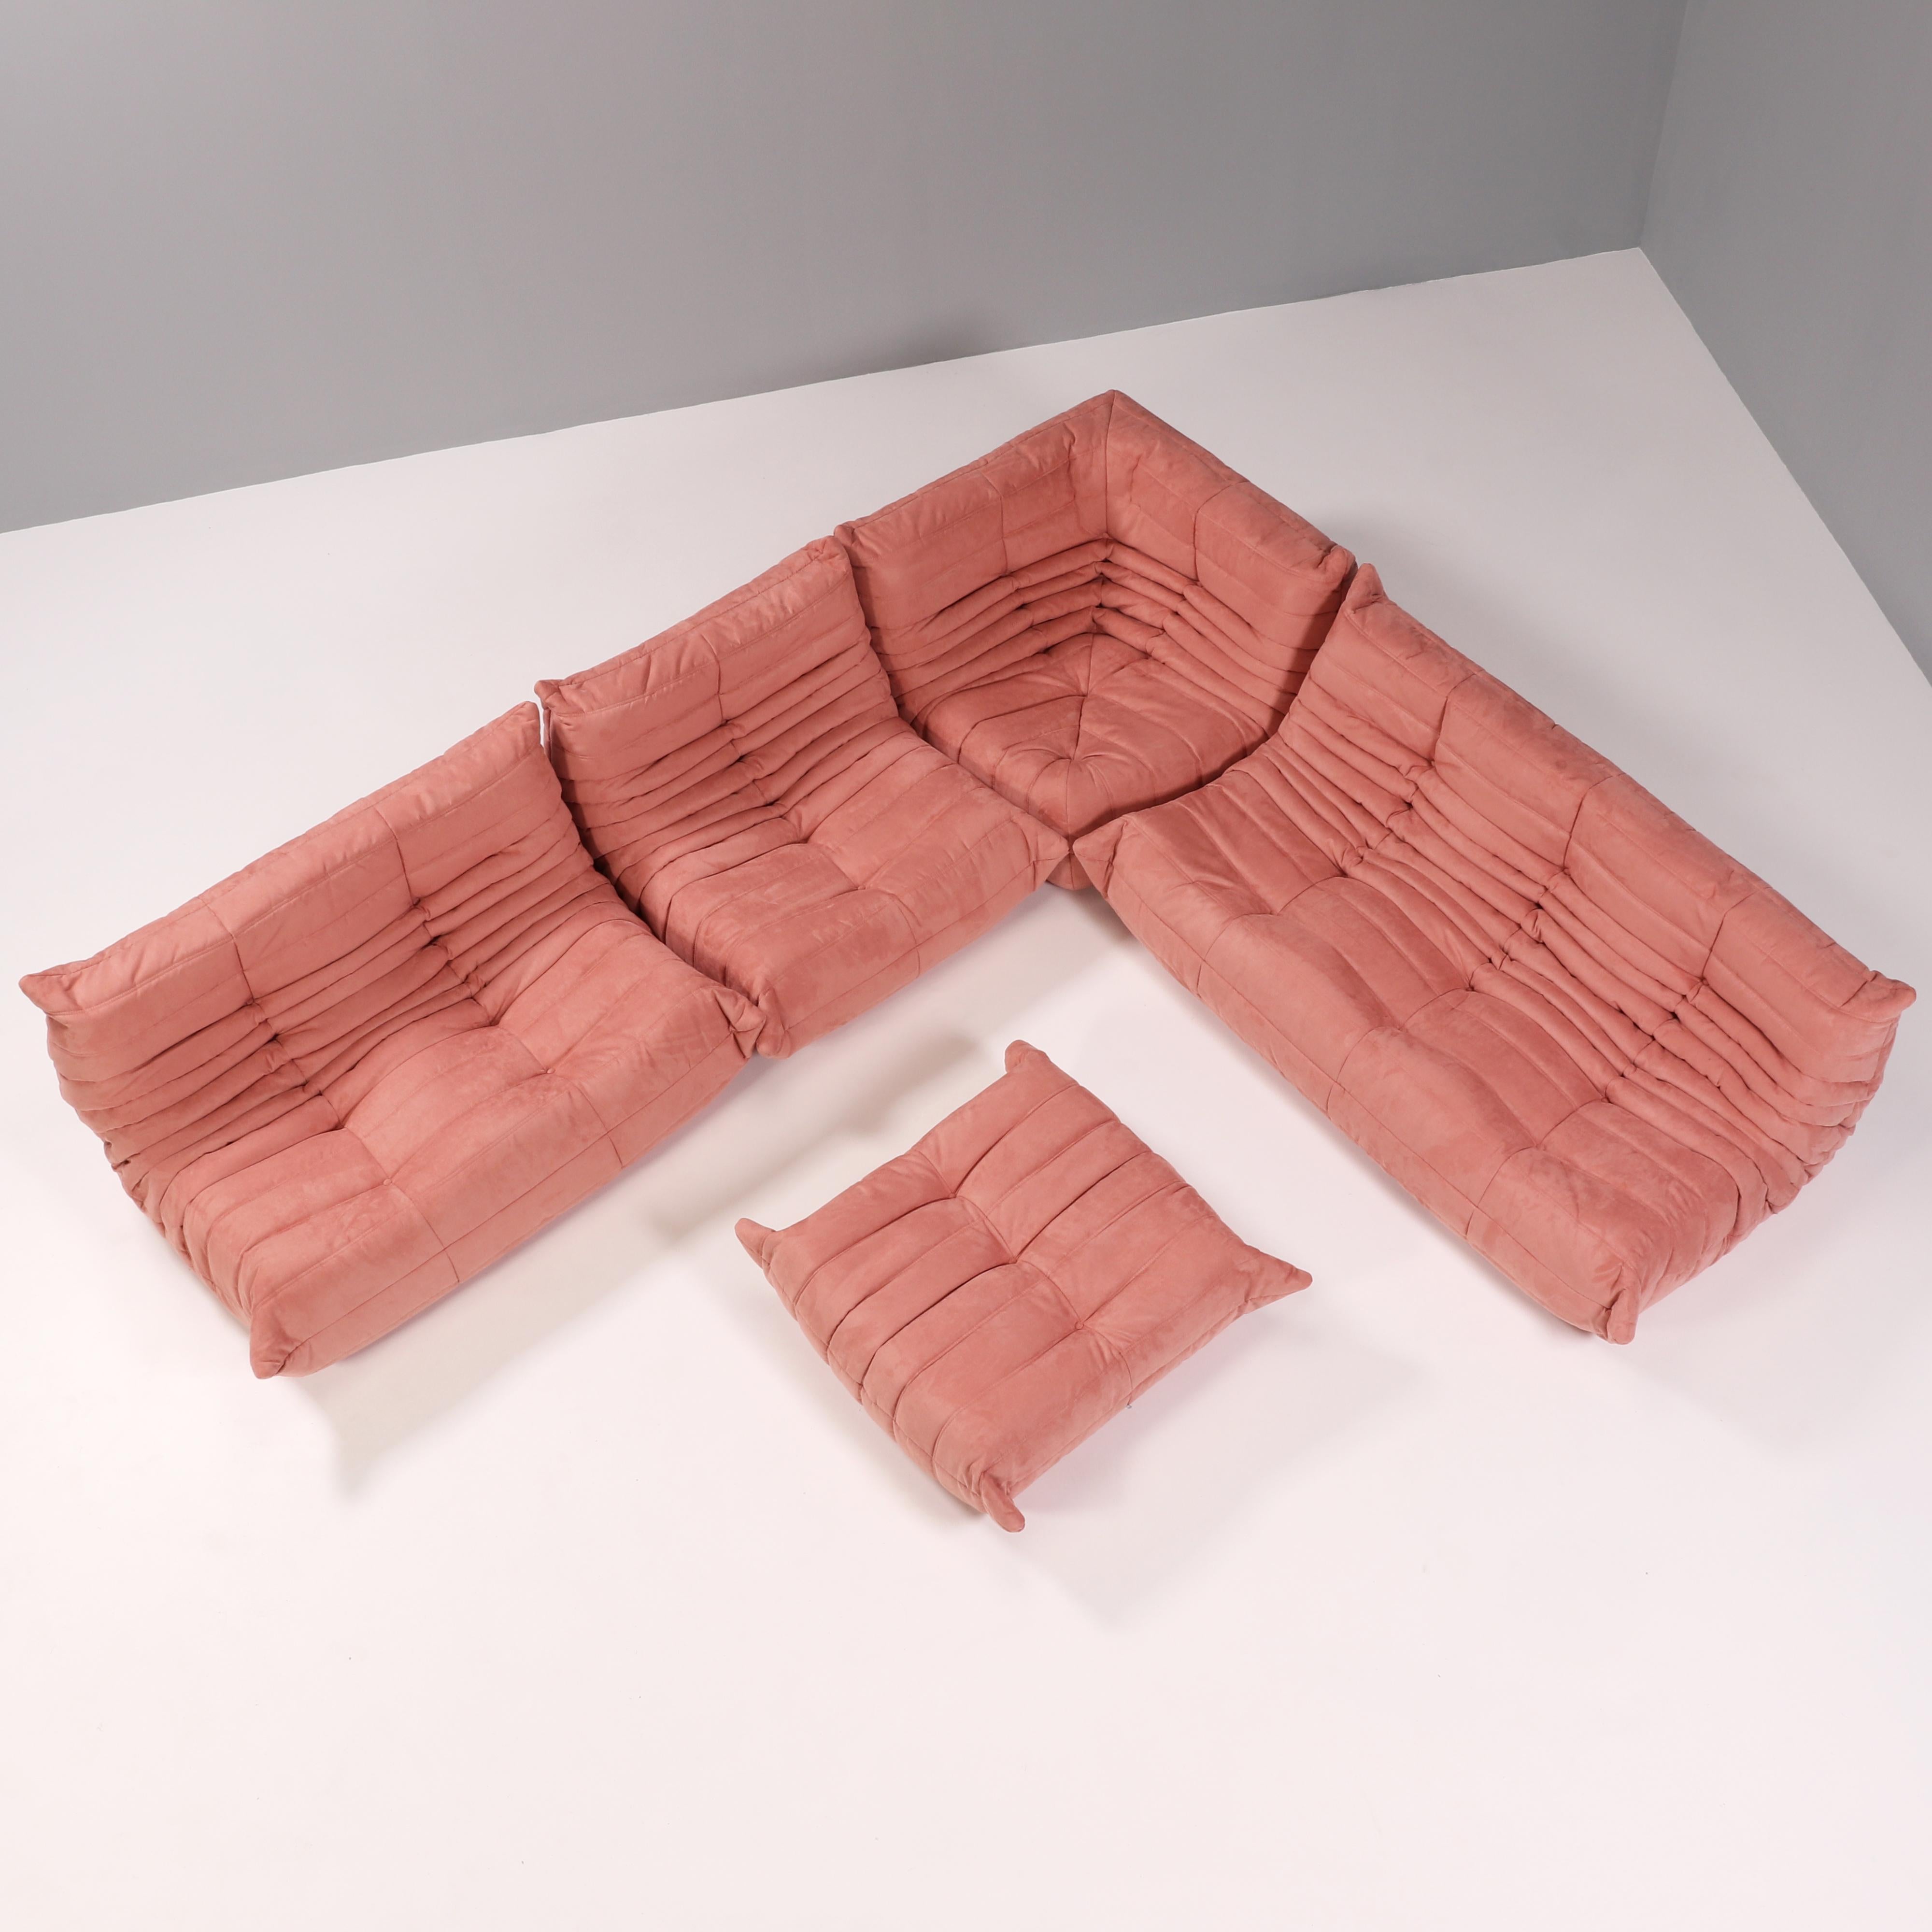 The iconic Togo sofa, originally designed by Michel Ducaroy for Ligne Roset in 1973 has become a design Classic.

This four-piece modular set is incredibly versatile and can be configured into one large corner sofa or split for a multitude of